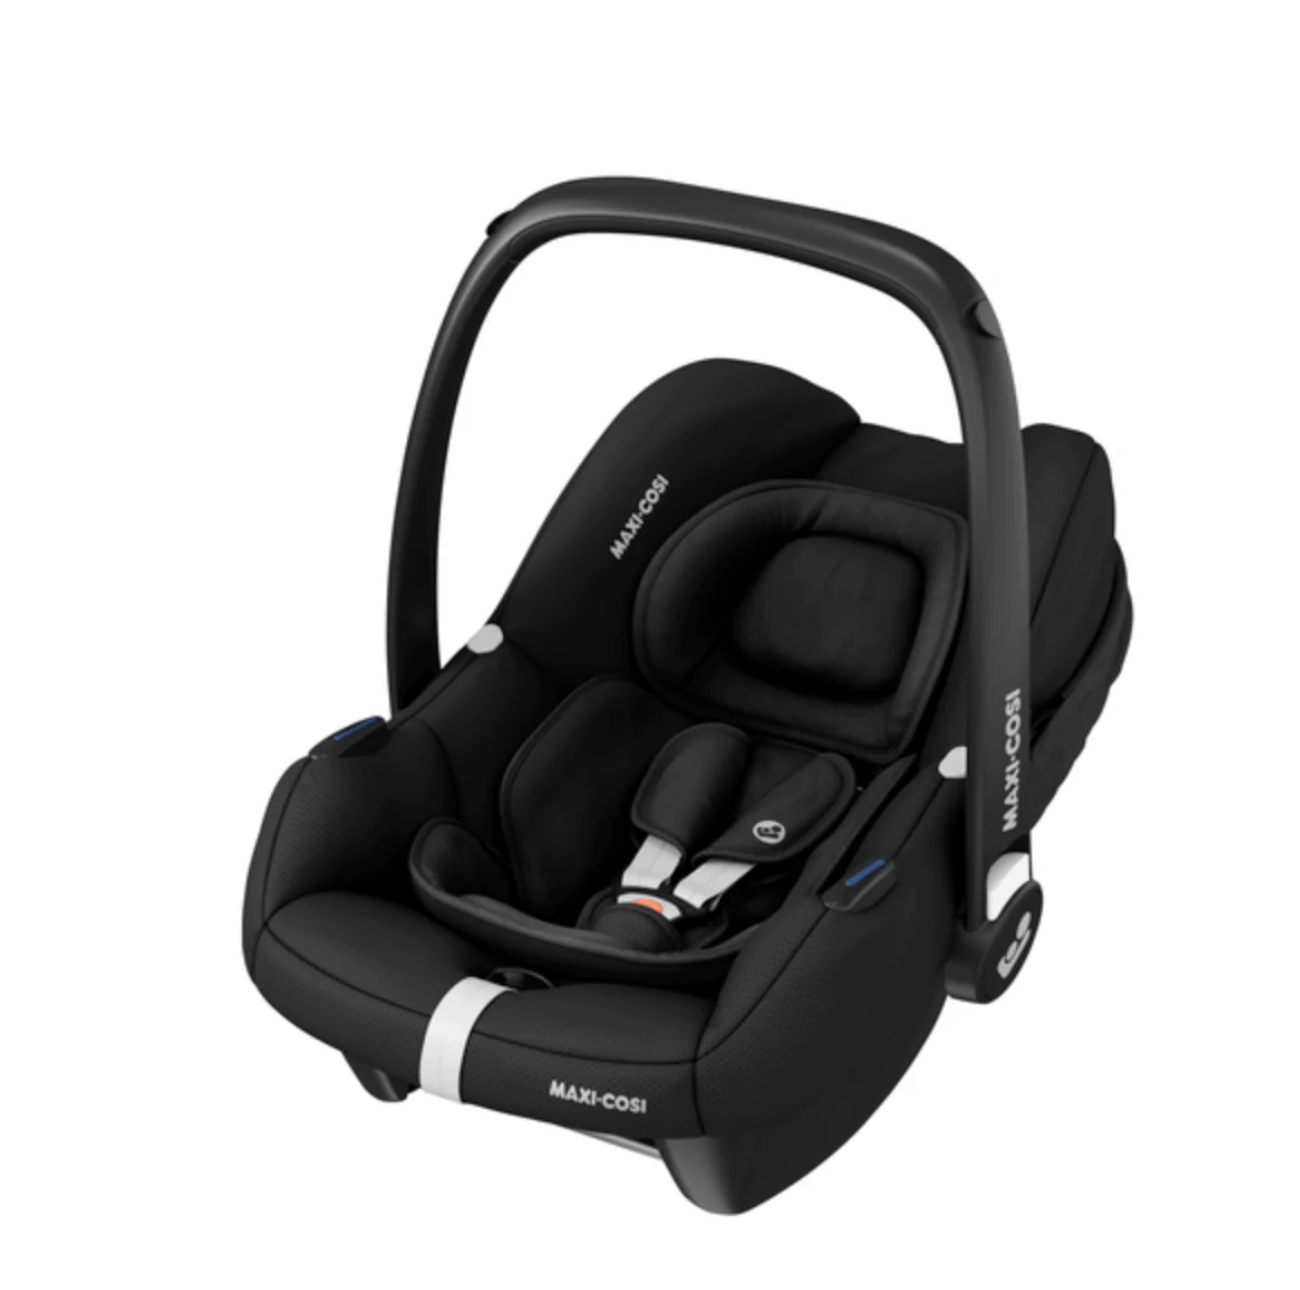 Silver Cross Tide Complete Travel System with Maxi-Cosi Cabriofix i-Size Car Seat | Stone on Silver